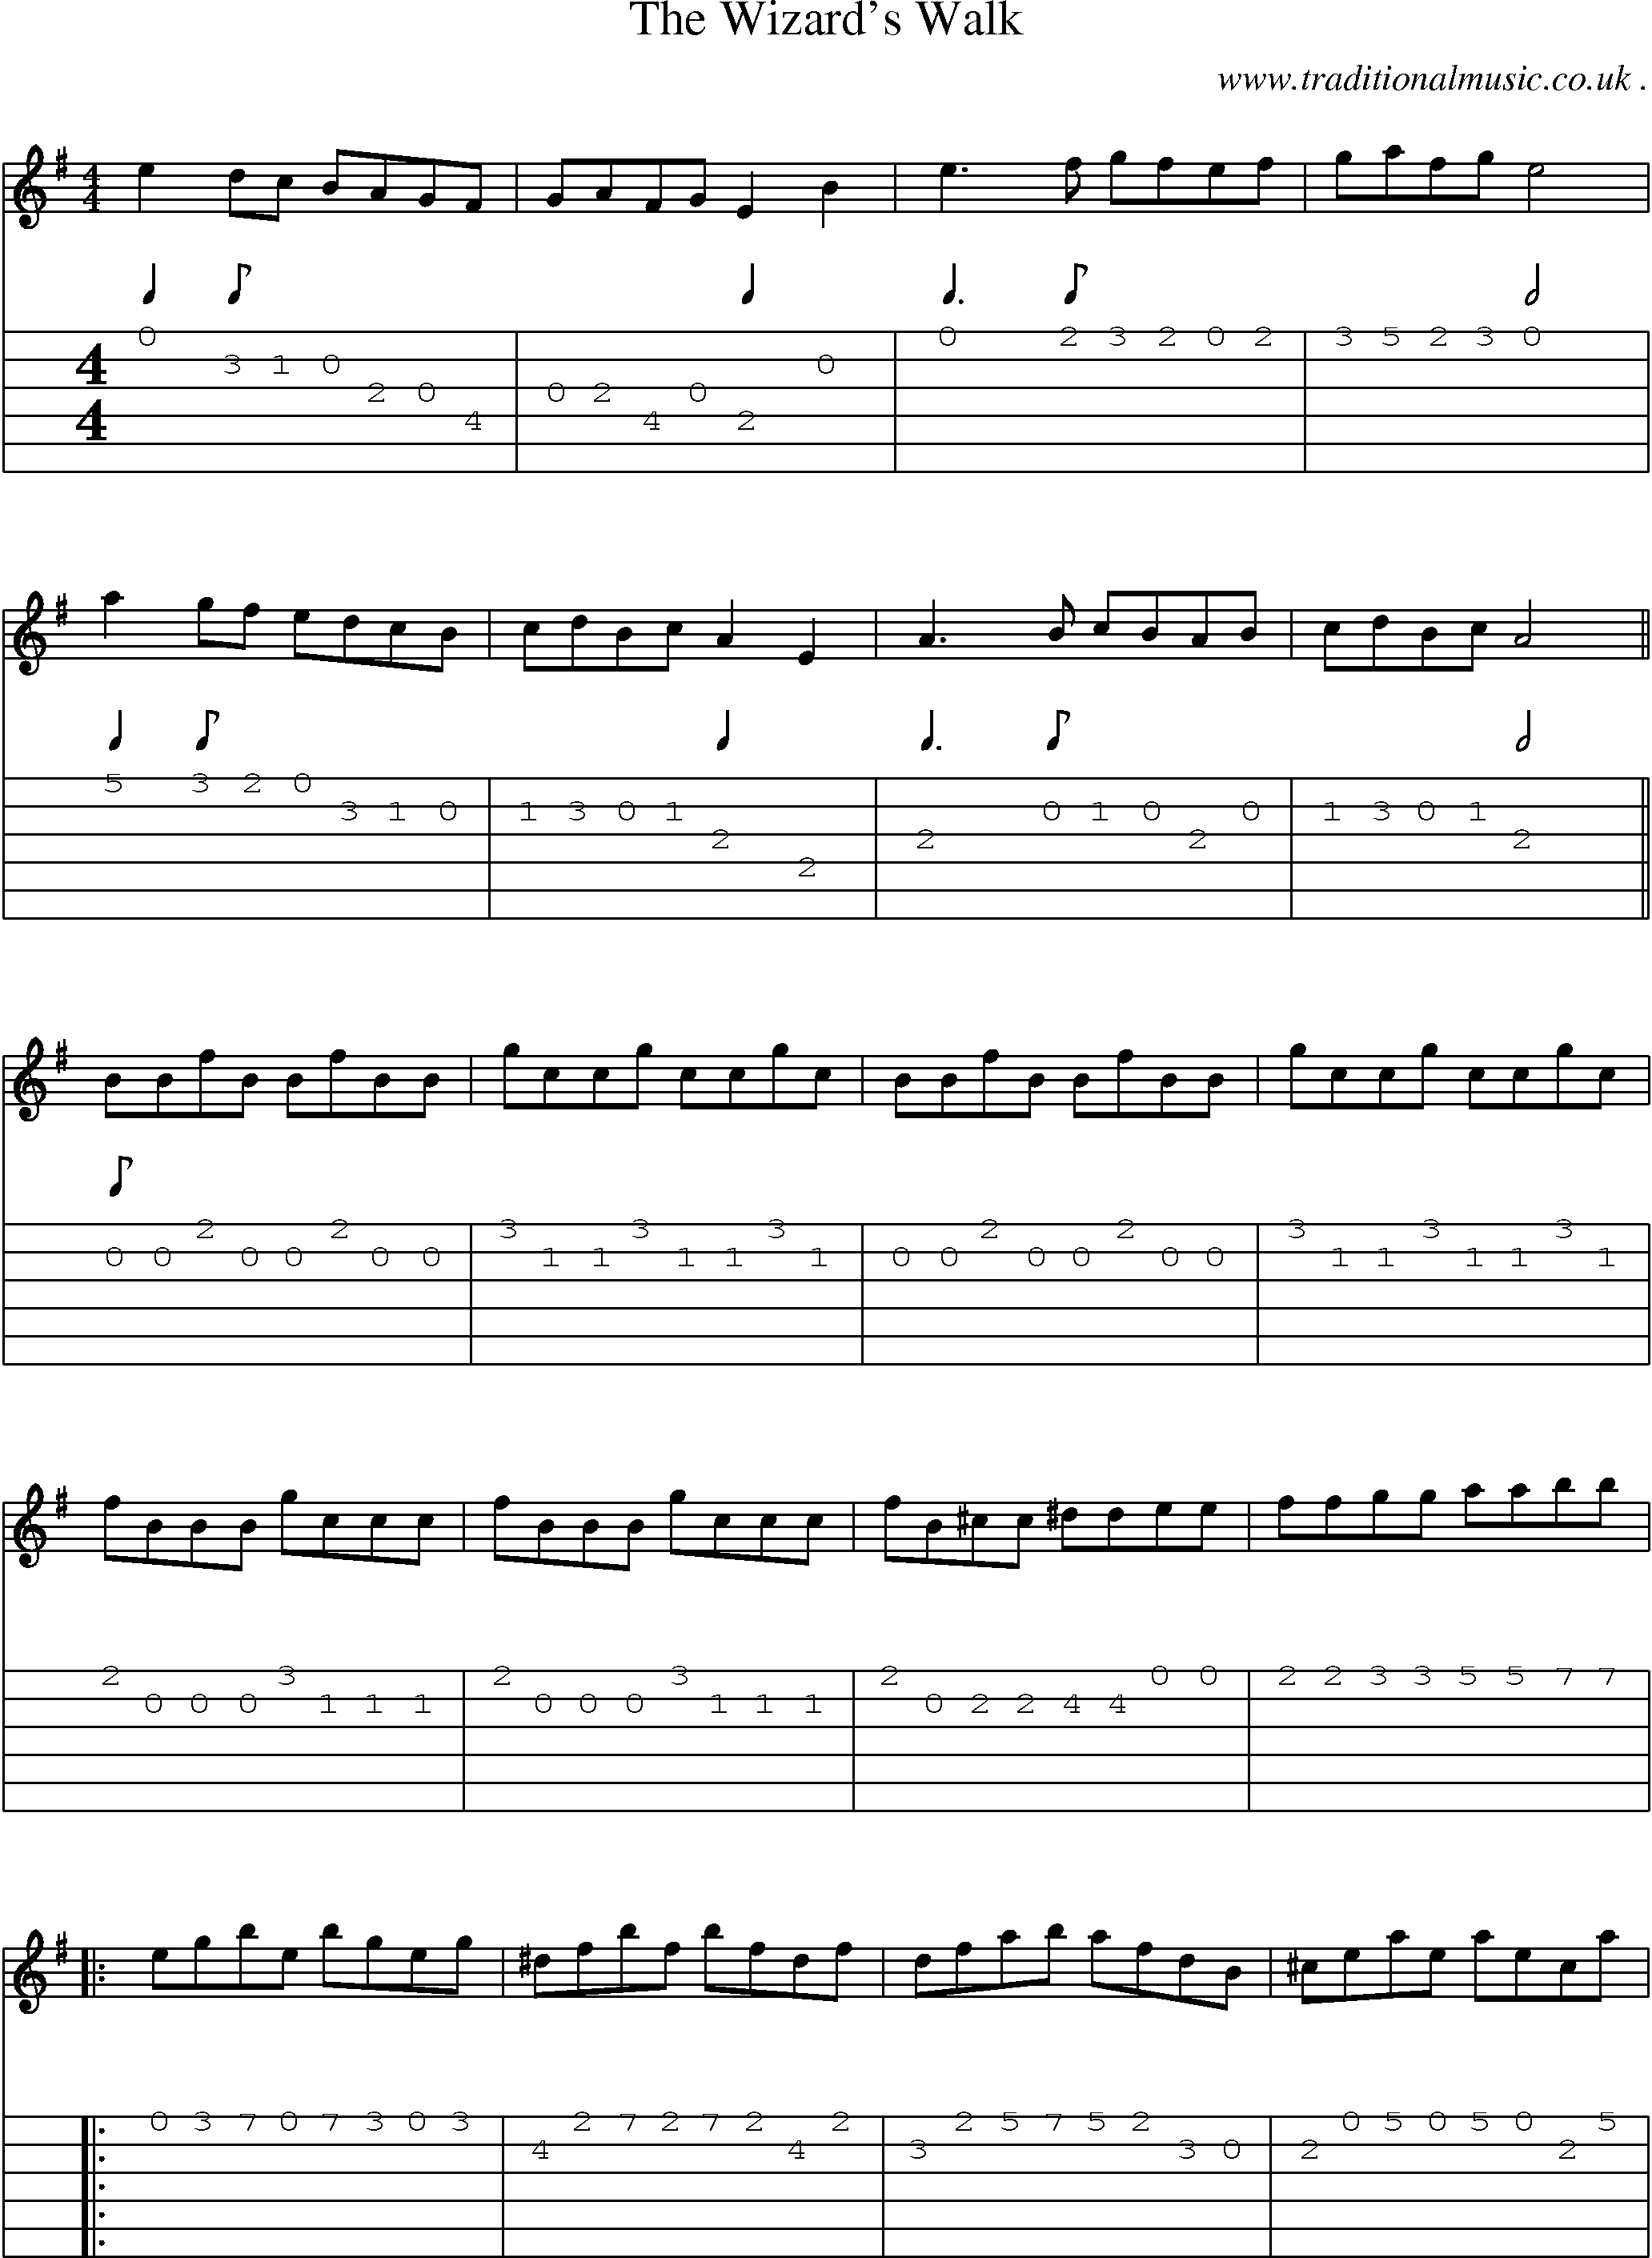 Sheet-Music and Guitar Tabs for The Wizards Walk